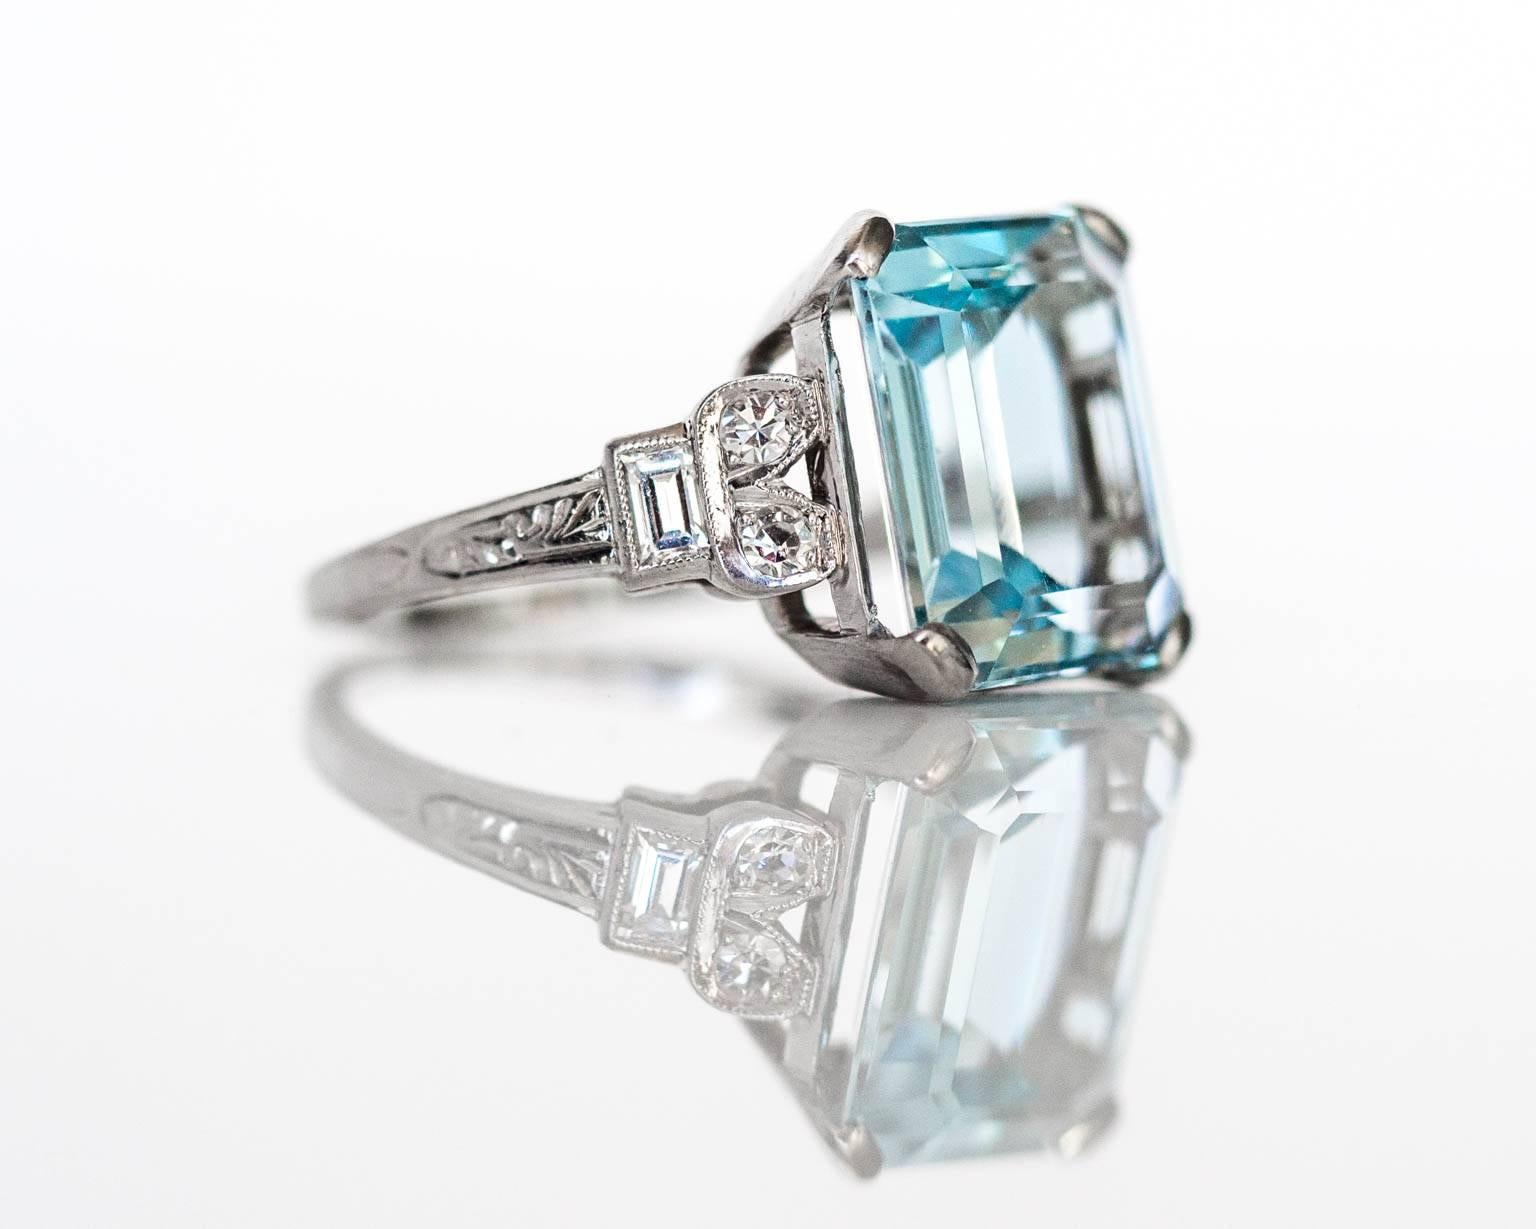 Vintage Art Deco Platinum Engagement Ring with London Blue Topaz Ring

Item Details: 
Ring Size: 6
Metal Type: Platinum
Weight: 5.9 grams

Color Stone Details: 
Type: London Blue Topaz
Shape: Emerald Cut
Carat Weight: 8.00 carat
Color: